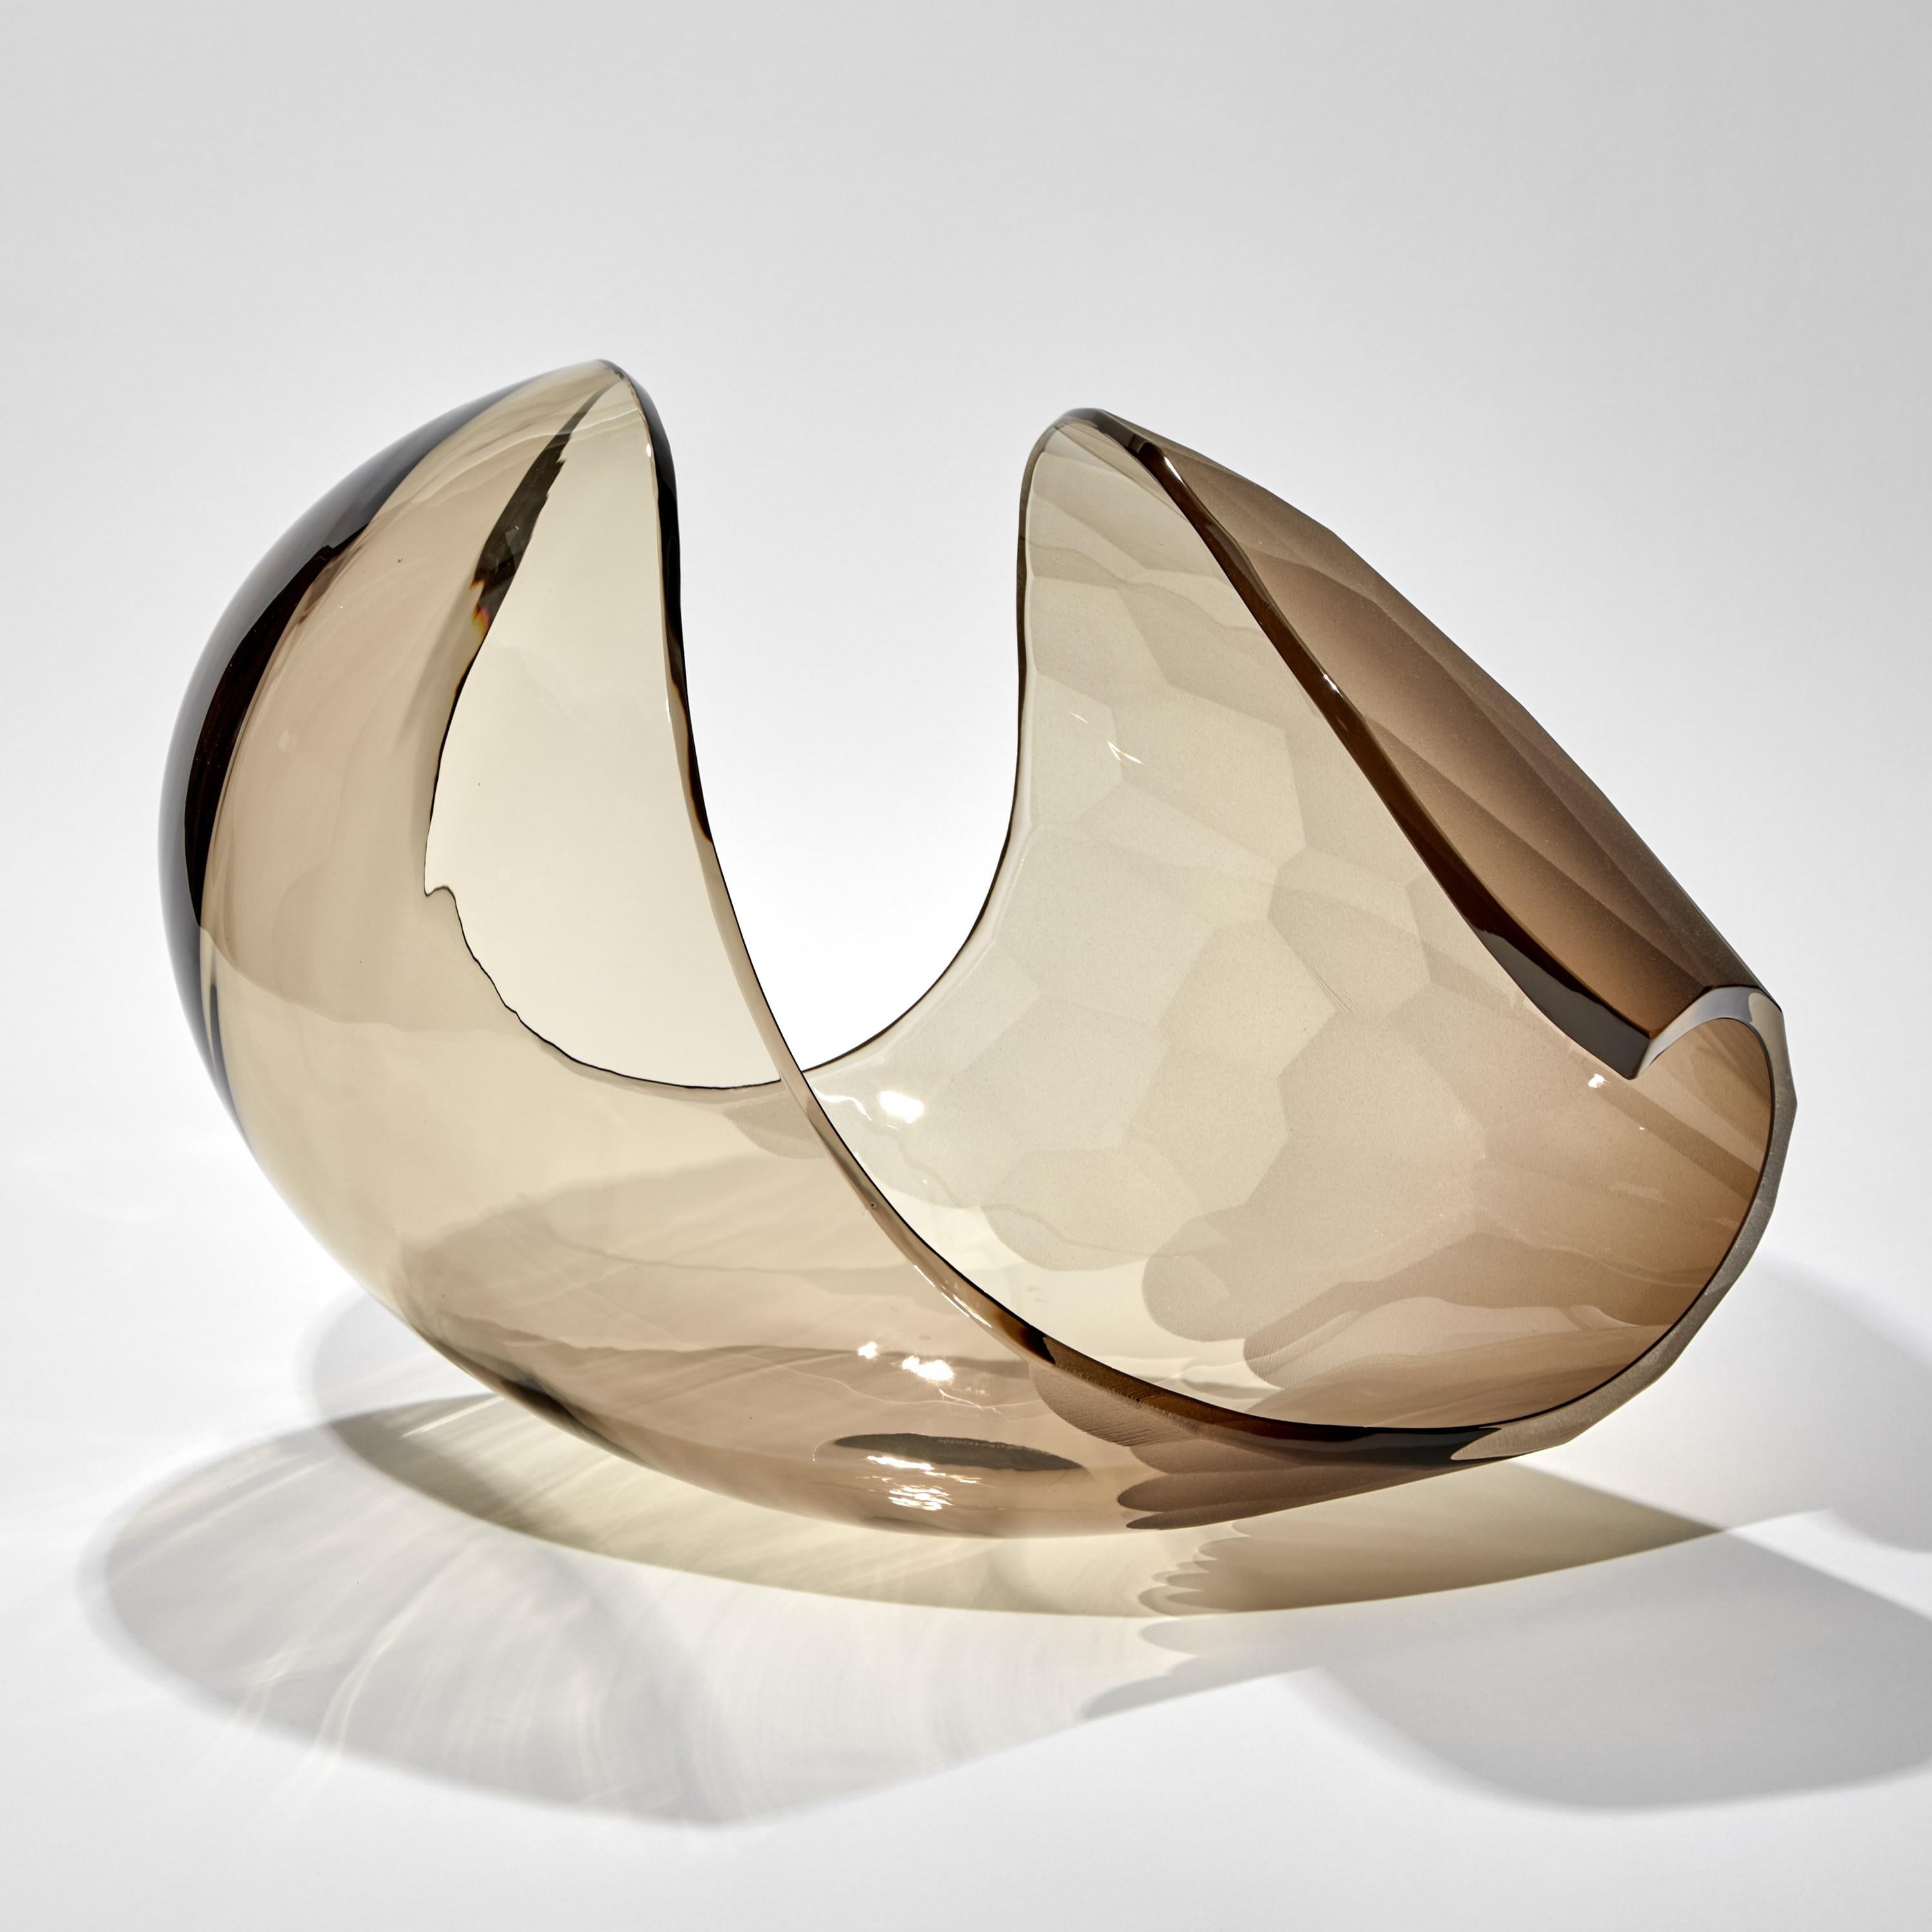 'Faceted Planet in Bronze' is a unique artwork by the Swedish artist and designer, Lena Bergström. It is from an ongoing collection of works called 'Planets', which Bergström has revisited several times throughout her extensive and highly revered